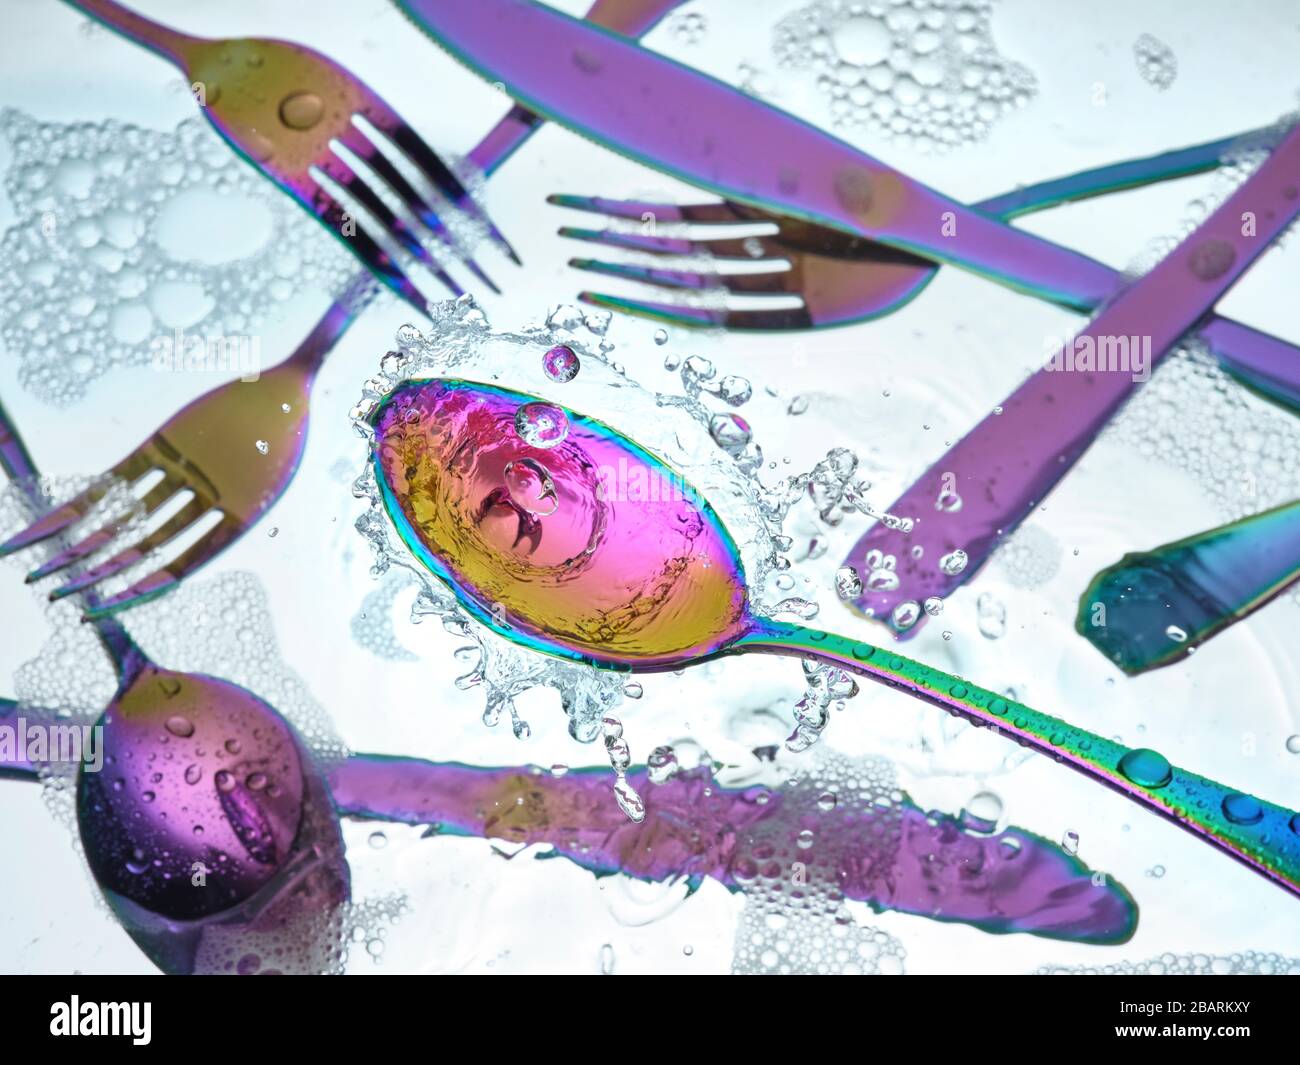 Washing colorful silverware in kitchen sink with splashes and bubbles Stock Photo